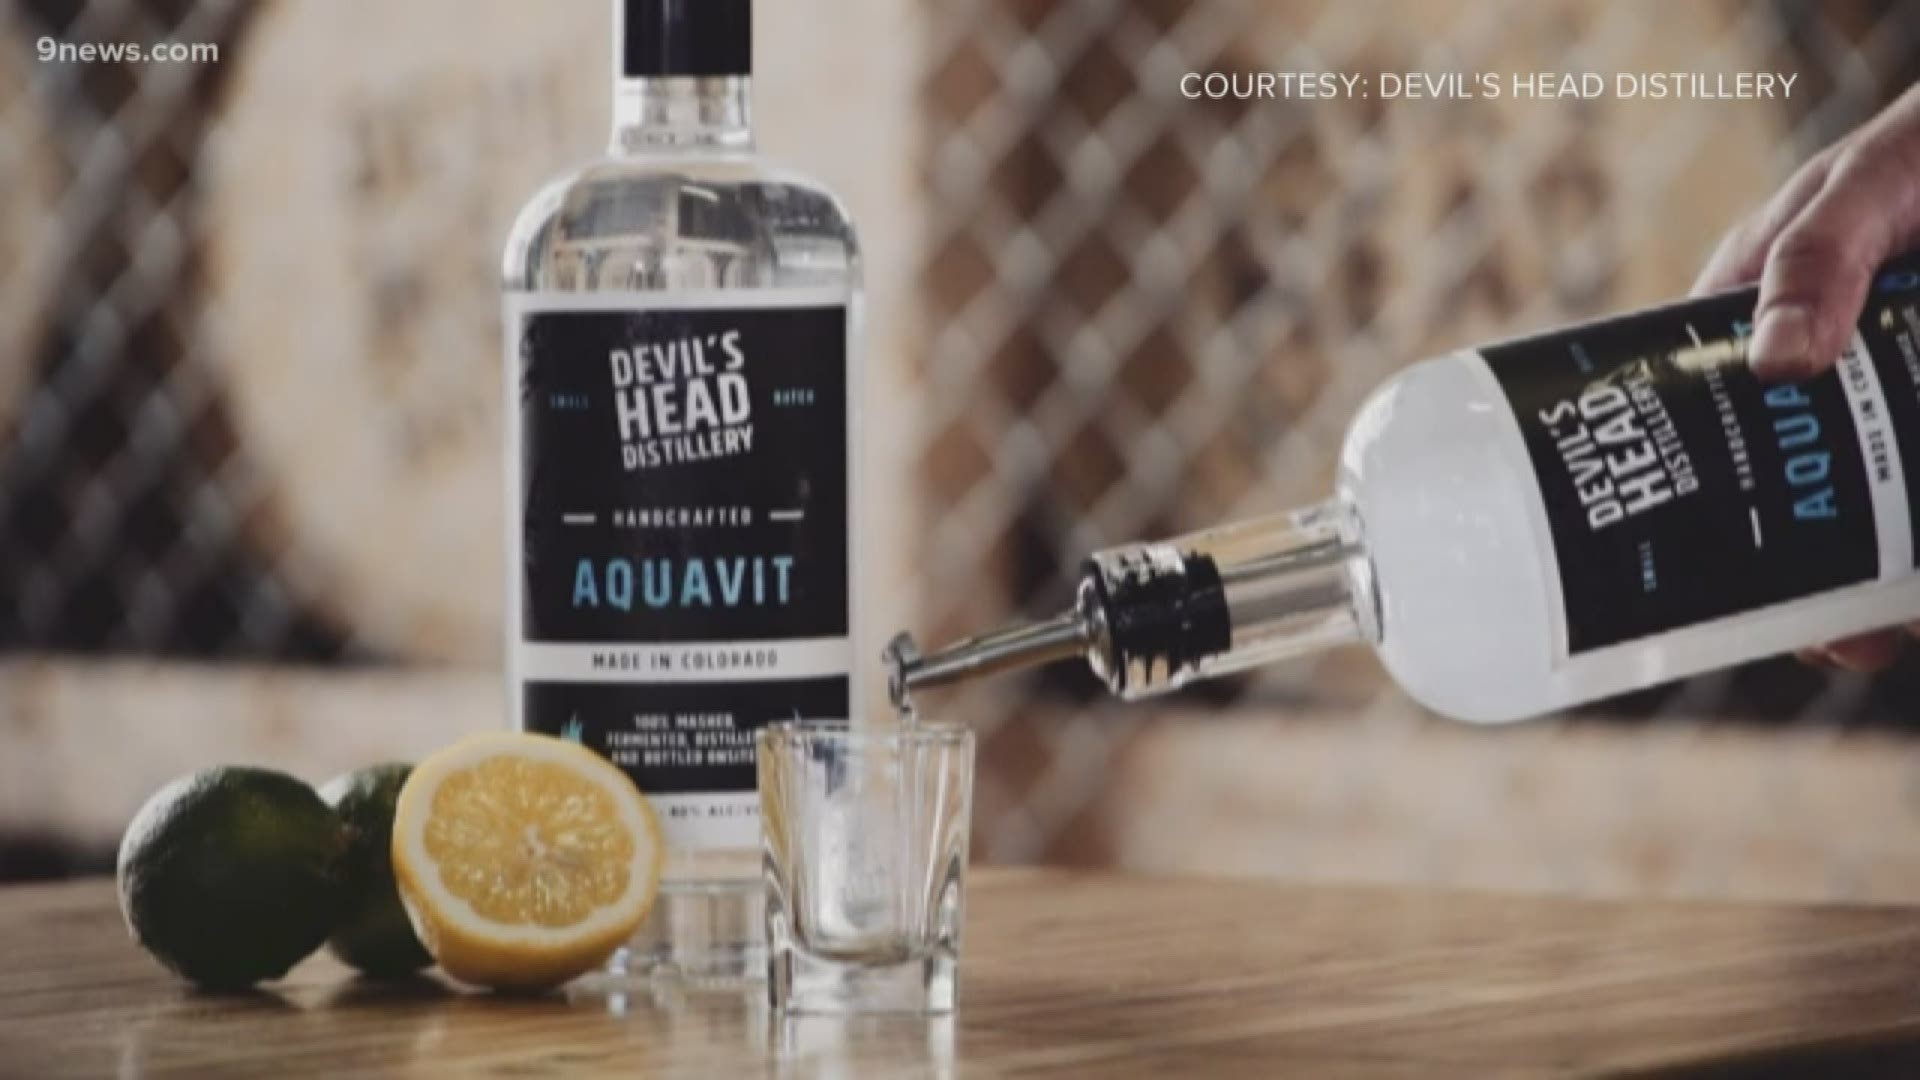 Devil's Head Distillery in Englewood said they are shutting down because of increased rent. They are known for bringing Aquavit to Colorado.